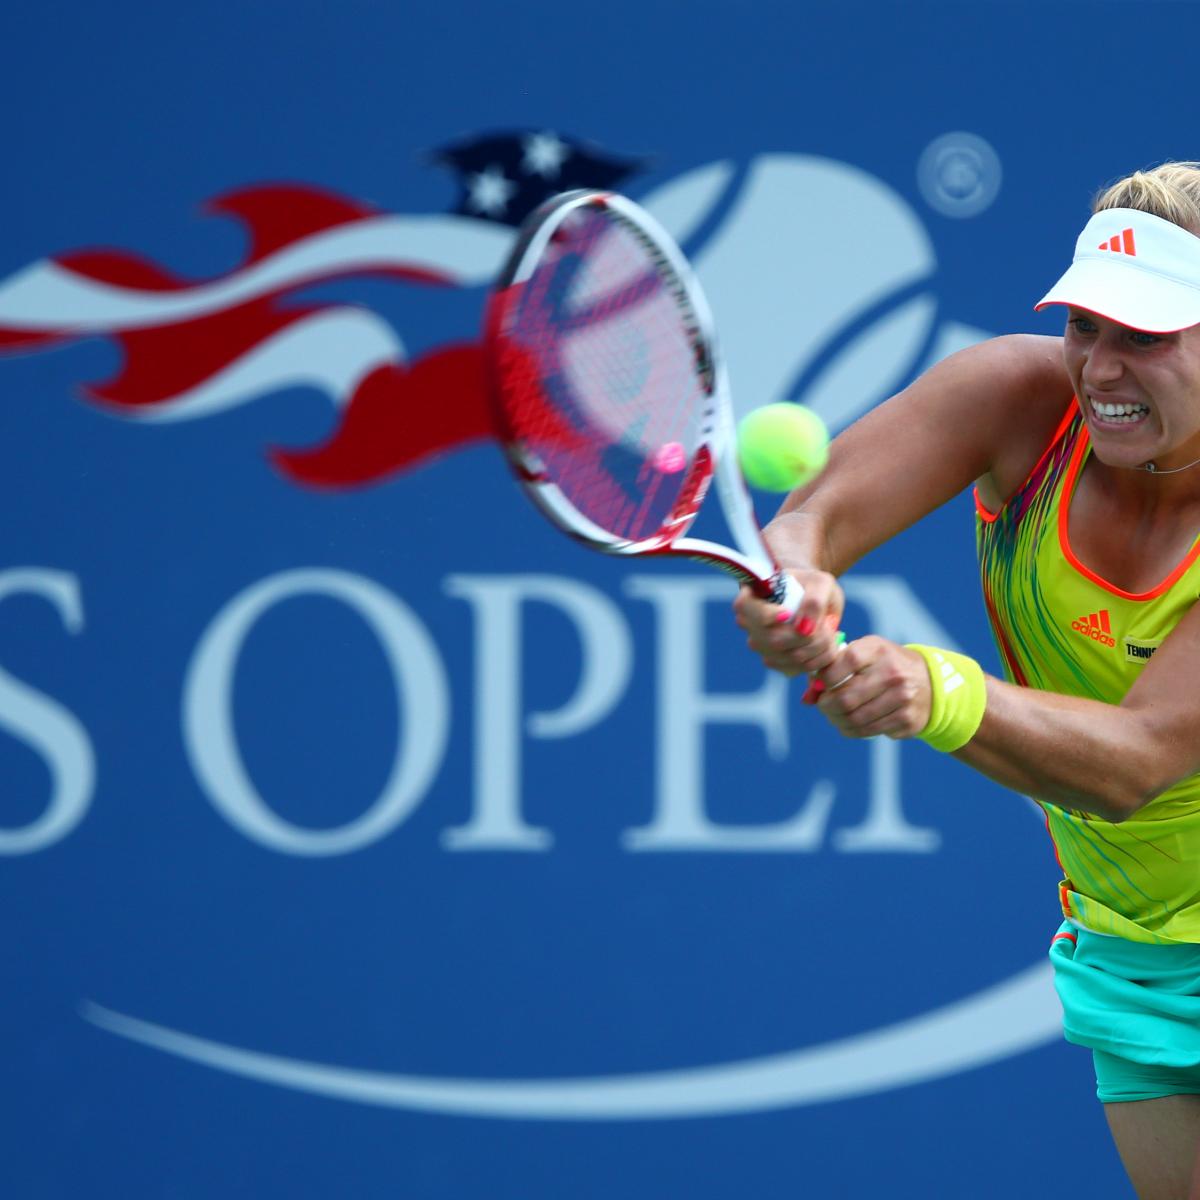 Angie Kerber at Top of Her Game, a Favorite to Win 2012 US Open | Bleacher Report ...1200 x 1200